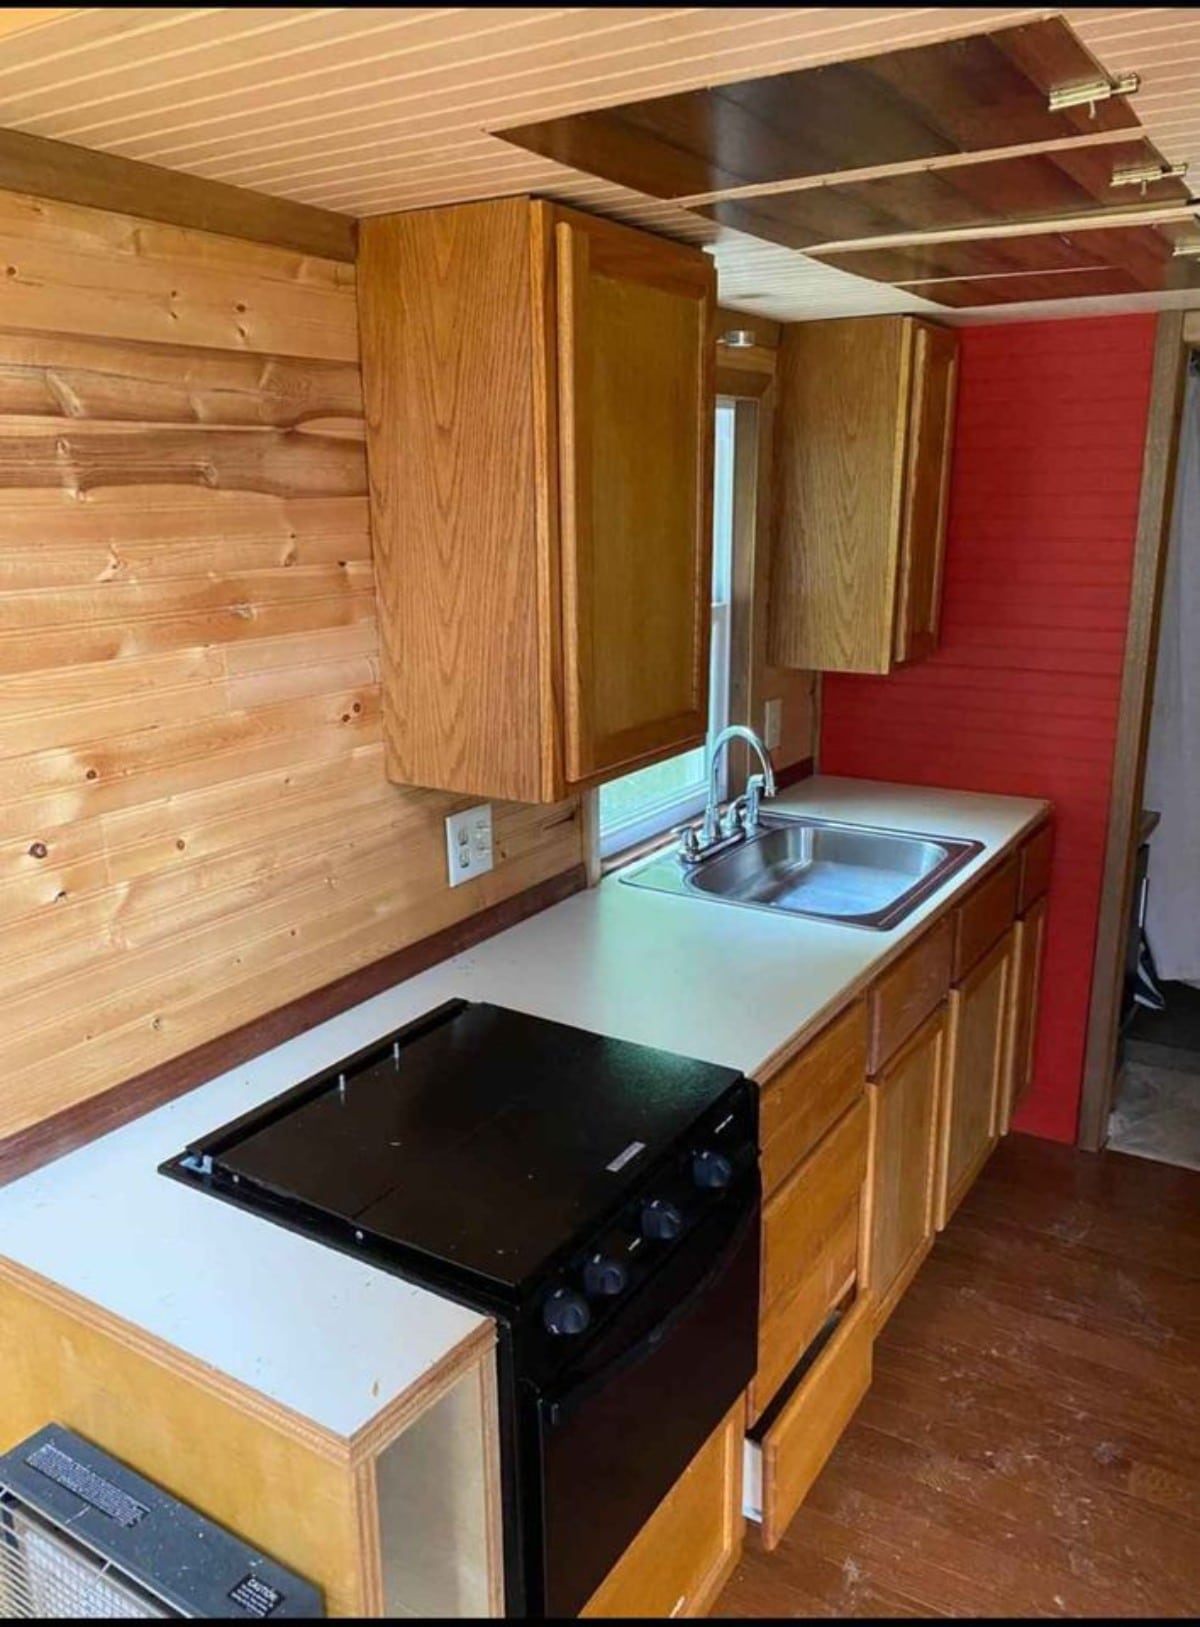 Kitchen area of 24' Off-Grid Tiny House